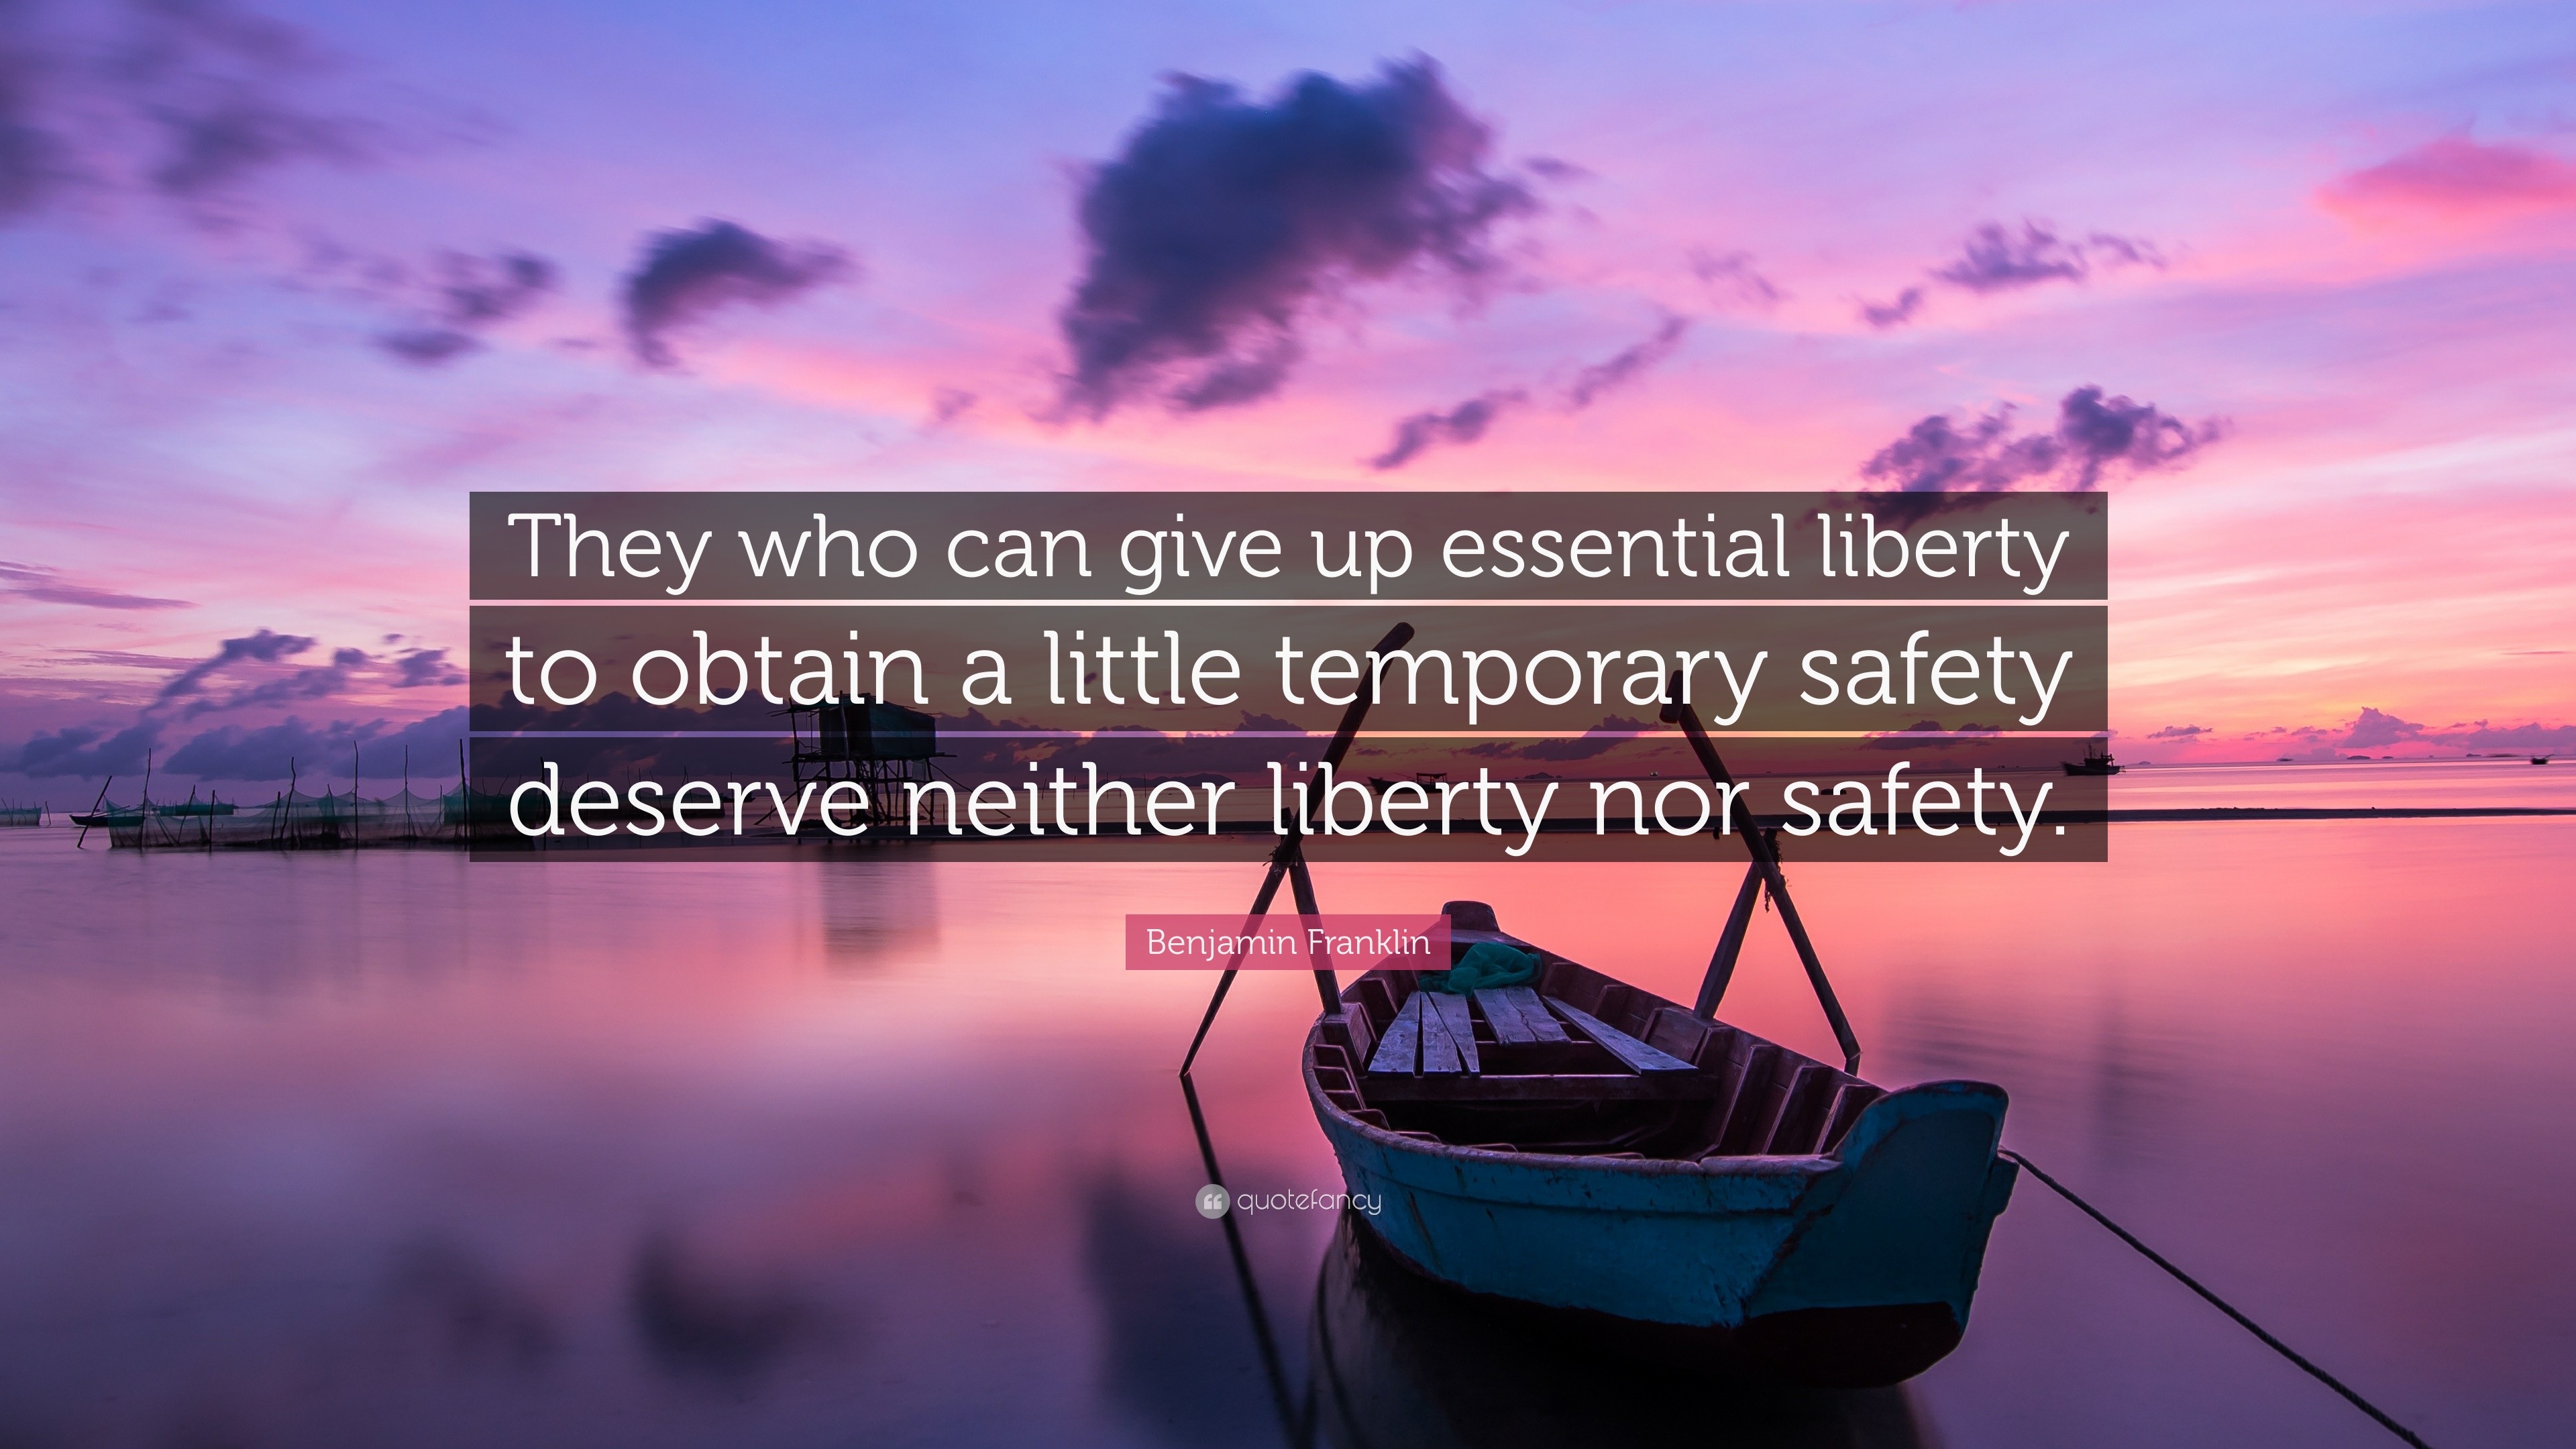 Benjamin Franklin Quote: “They who can give up essential liberty to